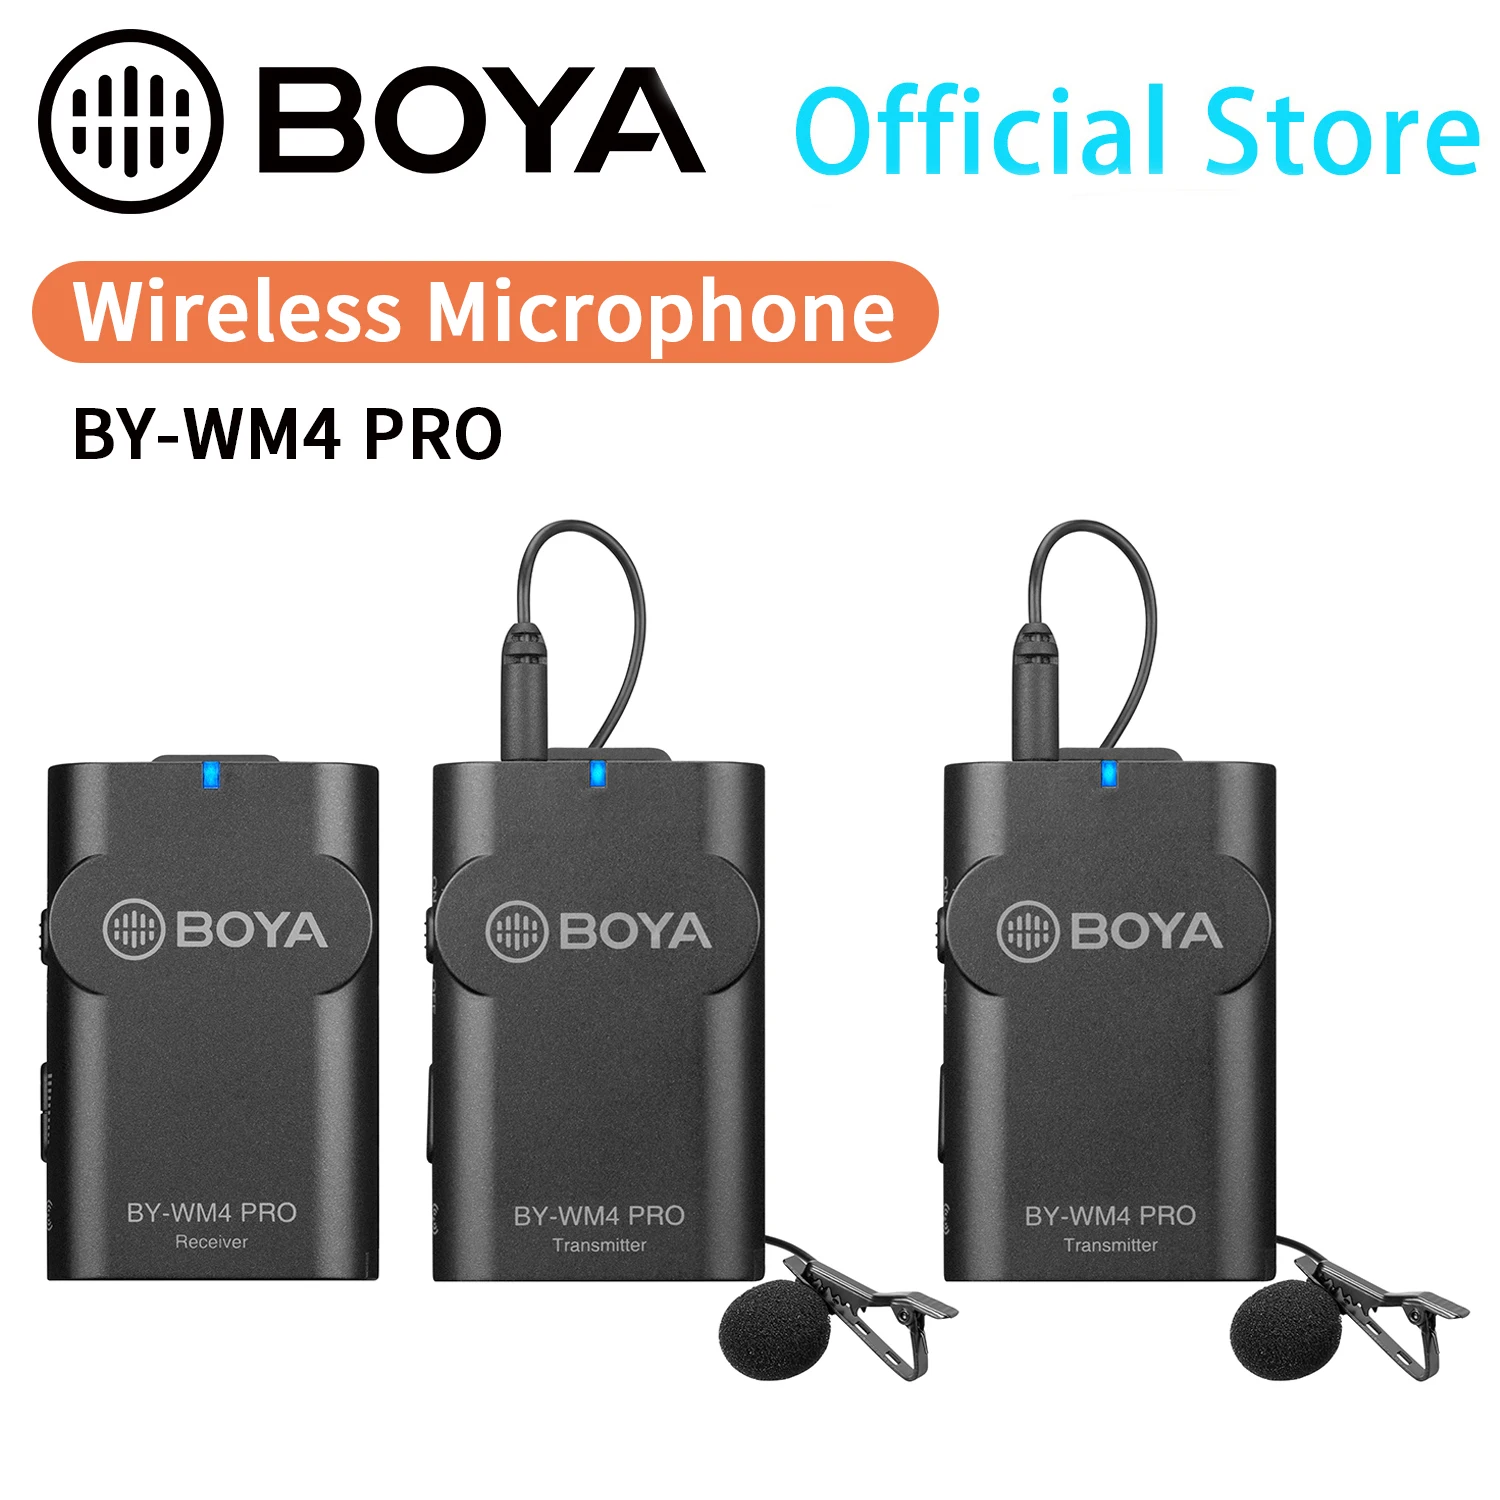 BOYA BY-WM4 PRO 2.4GHz Condenser Wireless Lavalier Lapel Microphone for PC iPhone Android Smartphone Xiaomi Huawei DSLRs Cameras